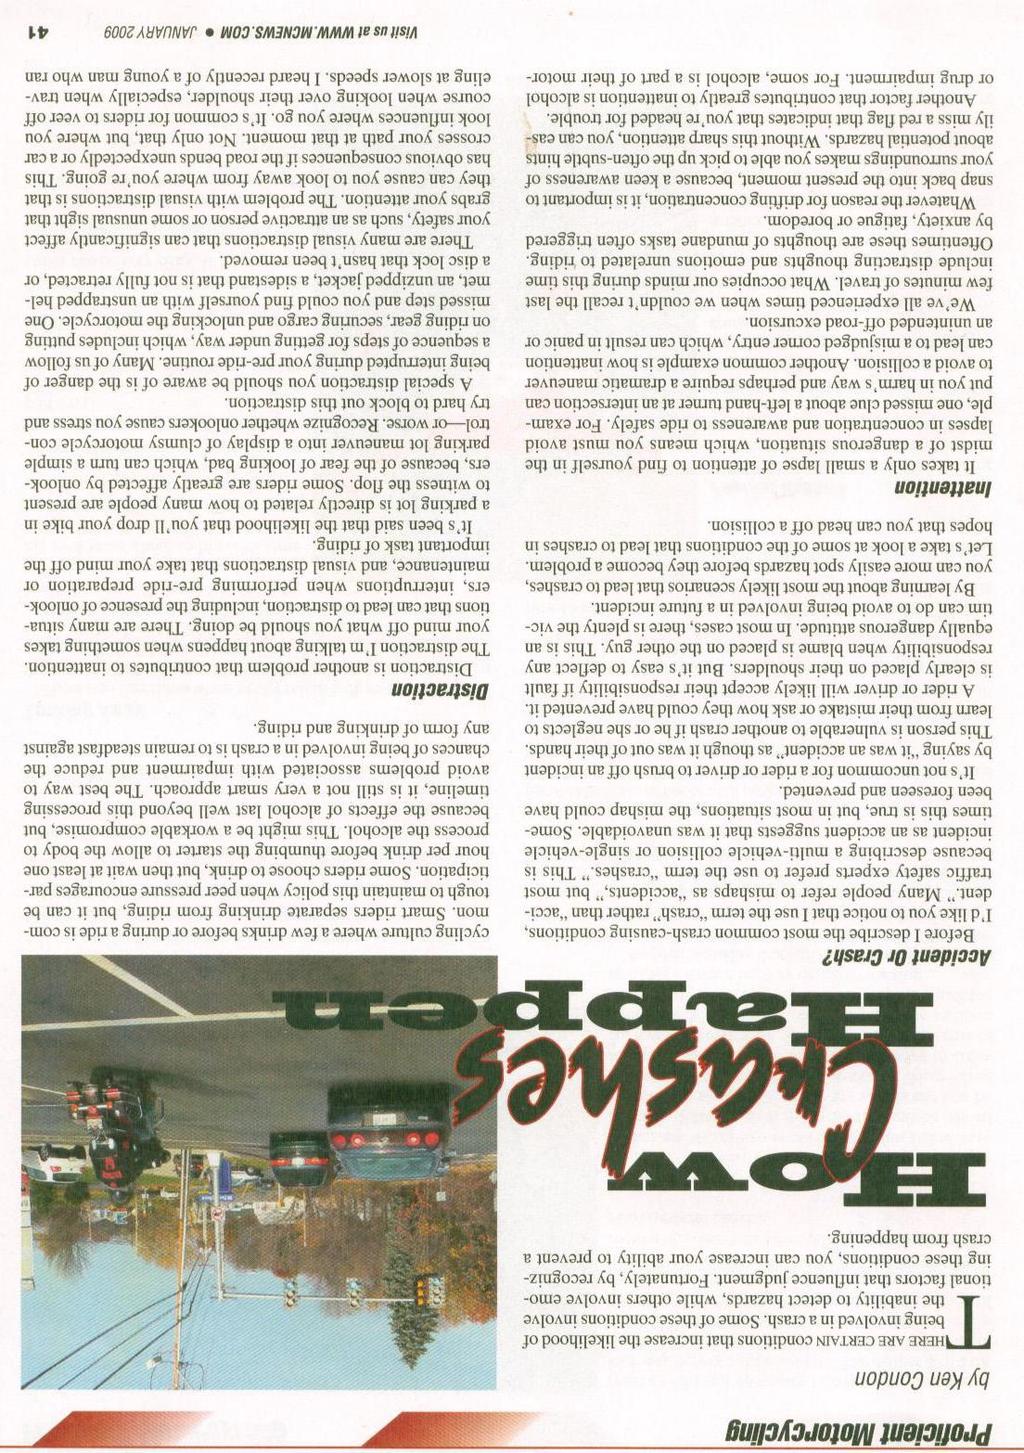 This is an excellent article taken from Motorcycle Consumer News.